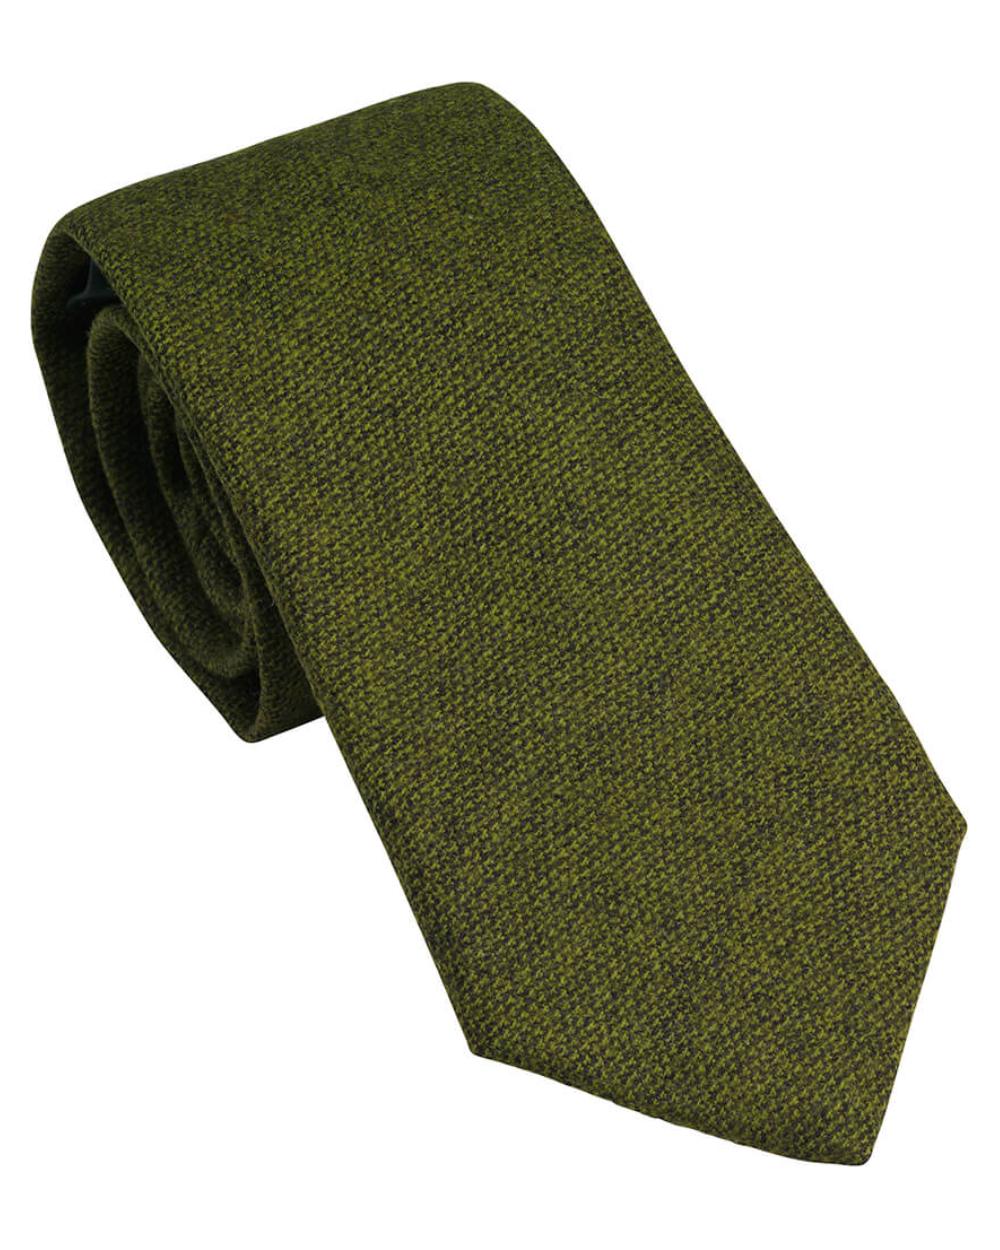 Clover Green Coloured Laksen Celtic Tweed Tie On A White Background 